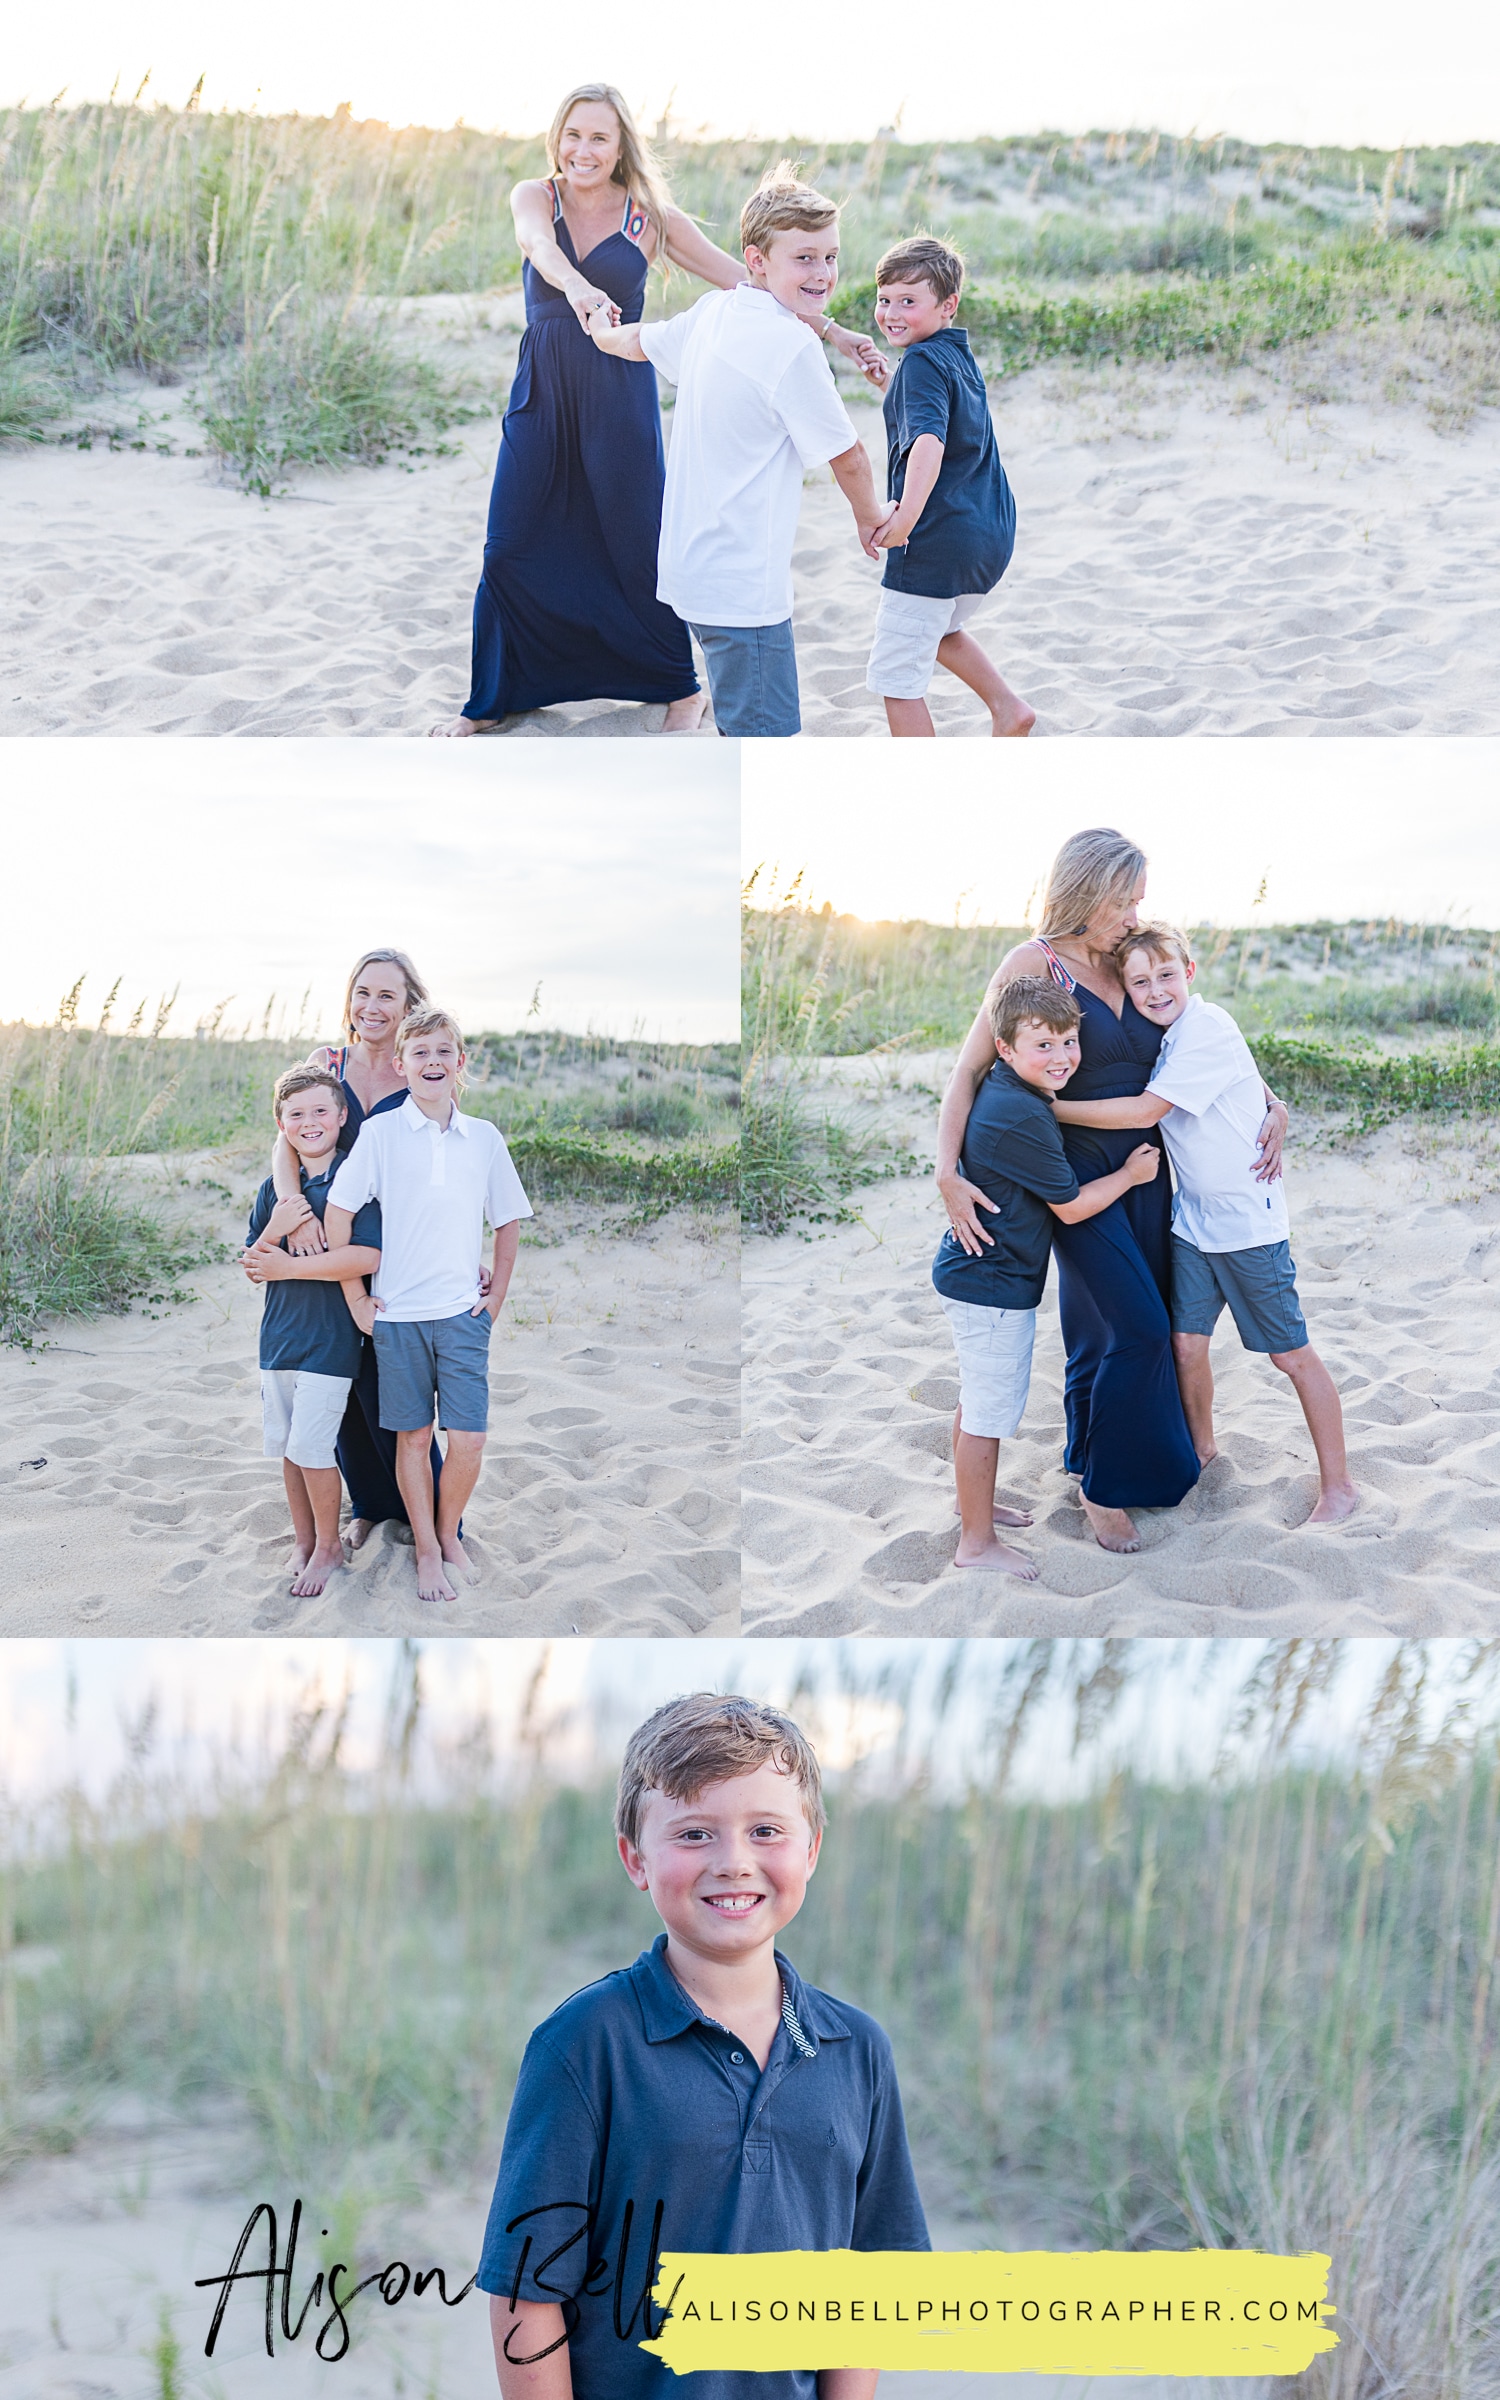 North end virginia beach family photo sessions at 81st by alison bell, photographer